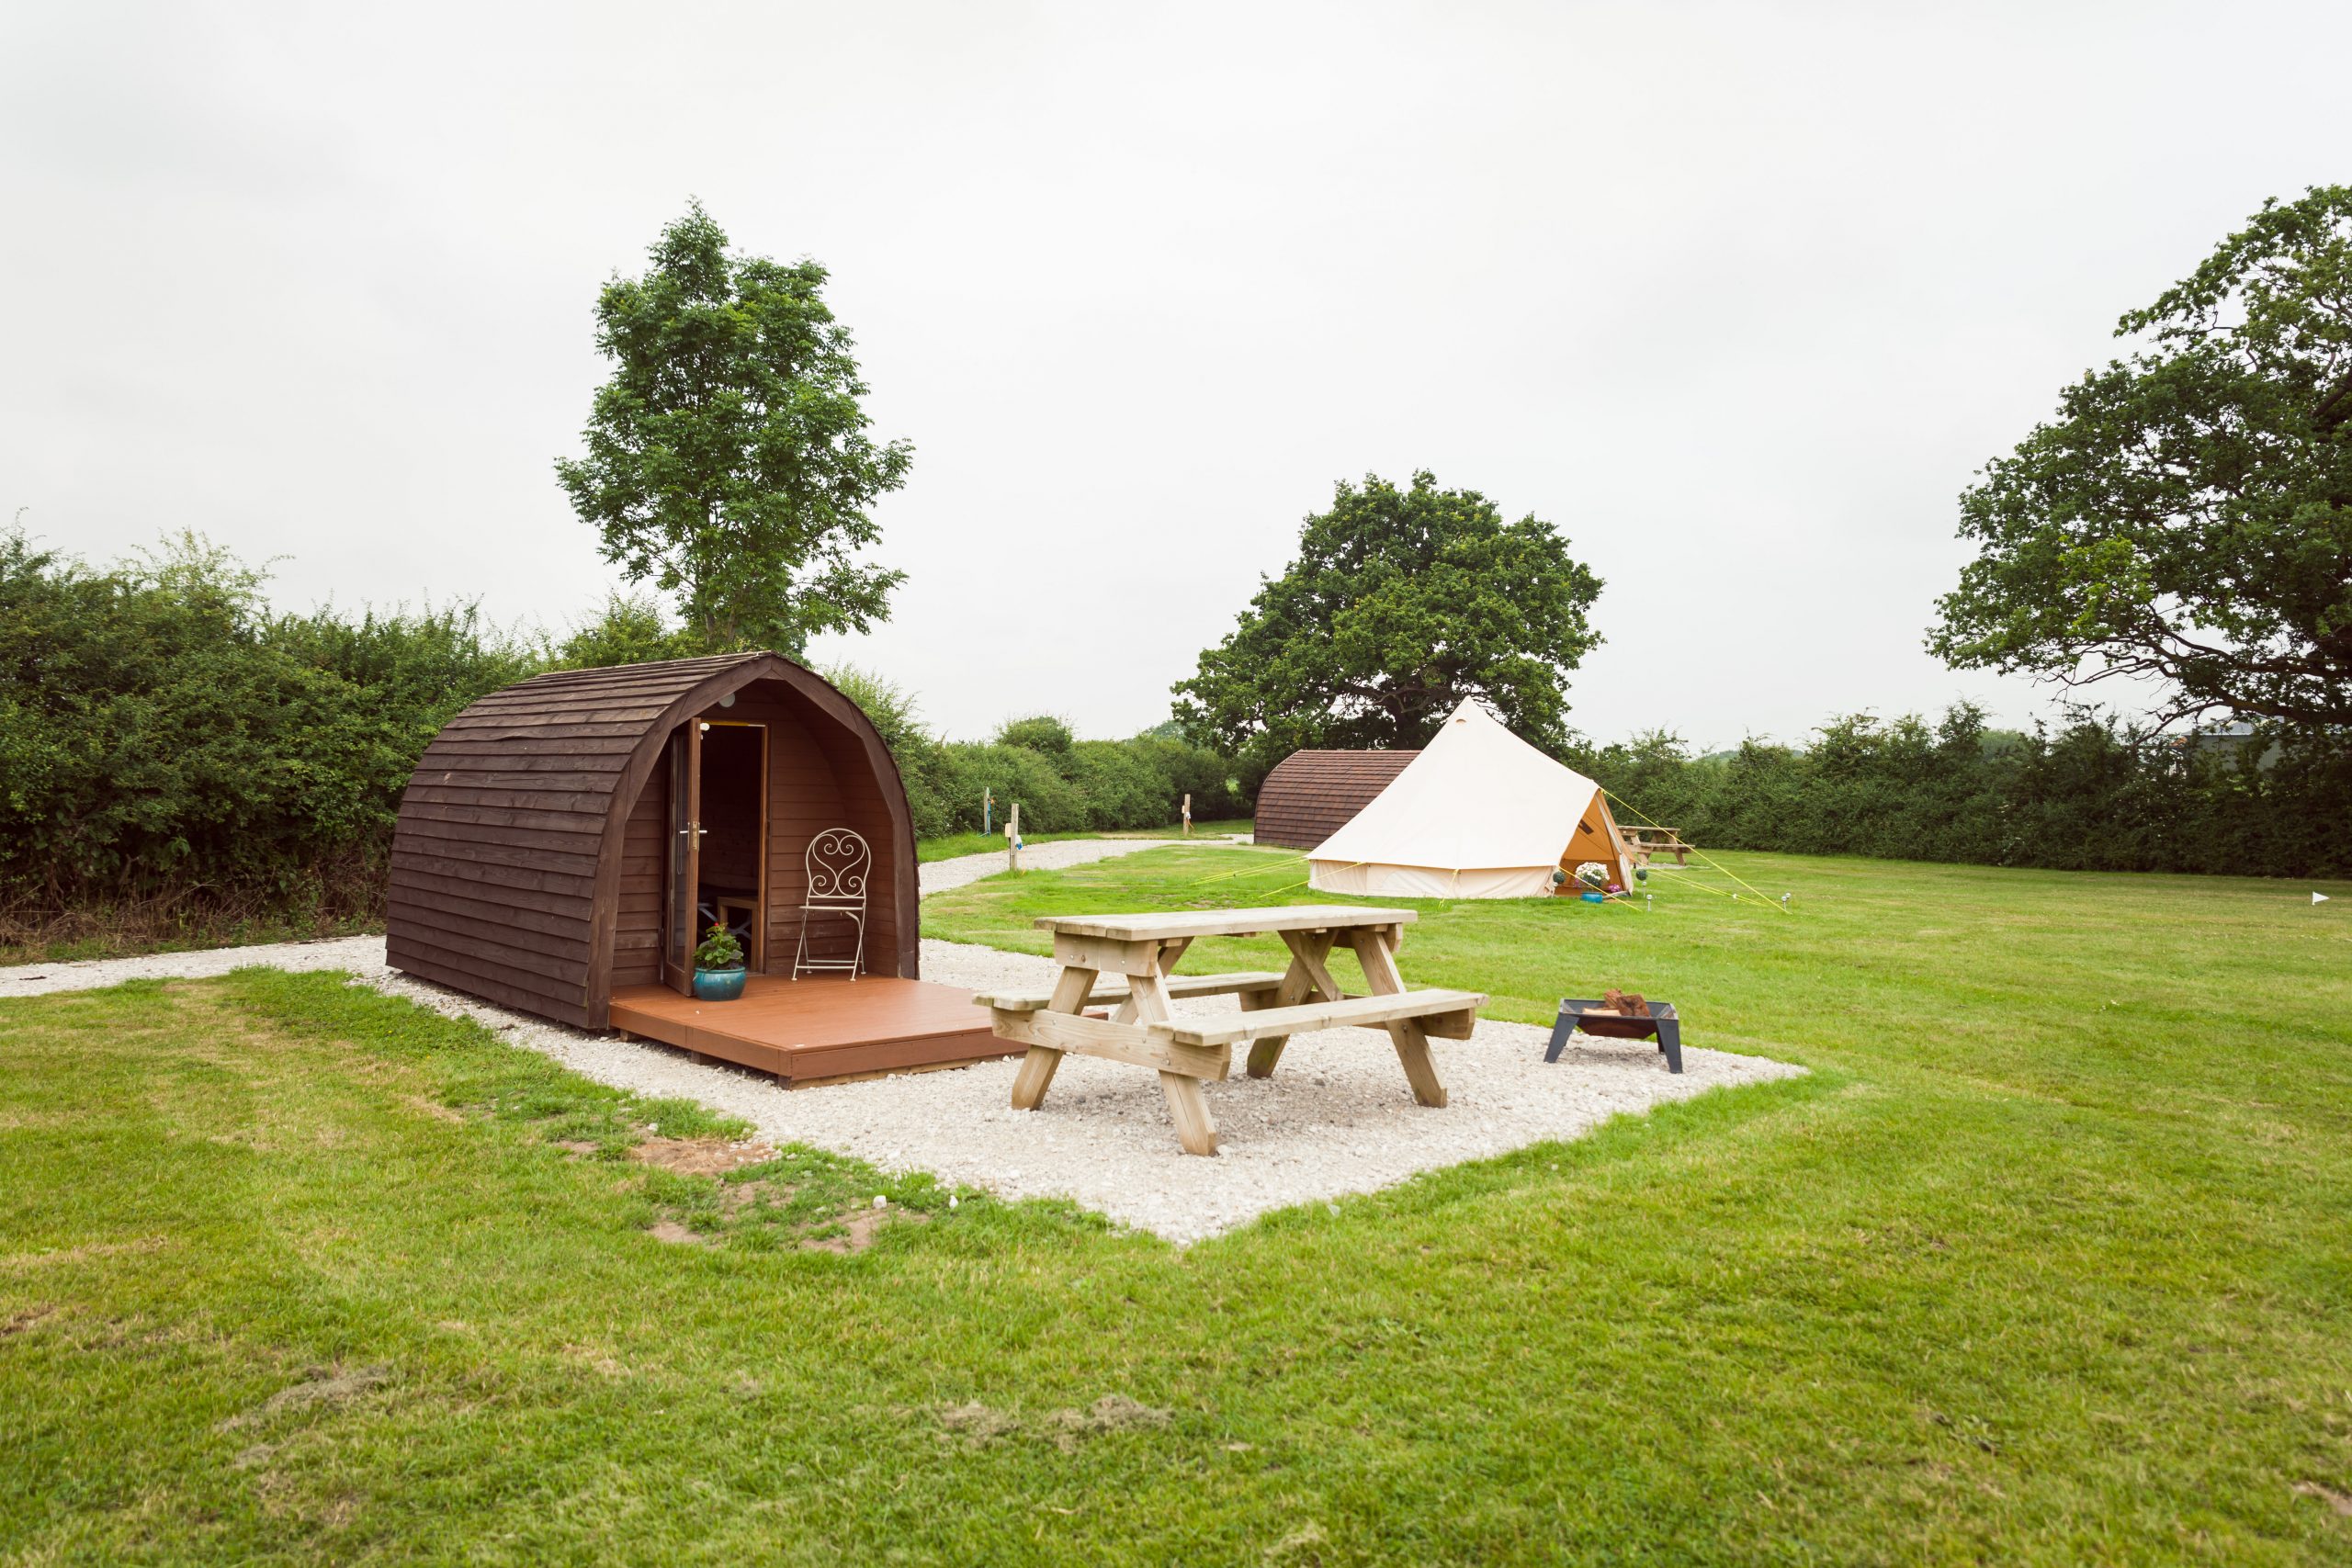 Pitch and Canvas | Glamping and Camping in Cheshire | Pods and tent